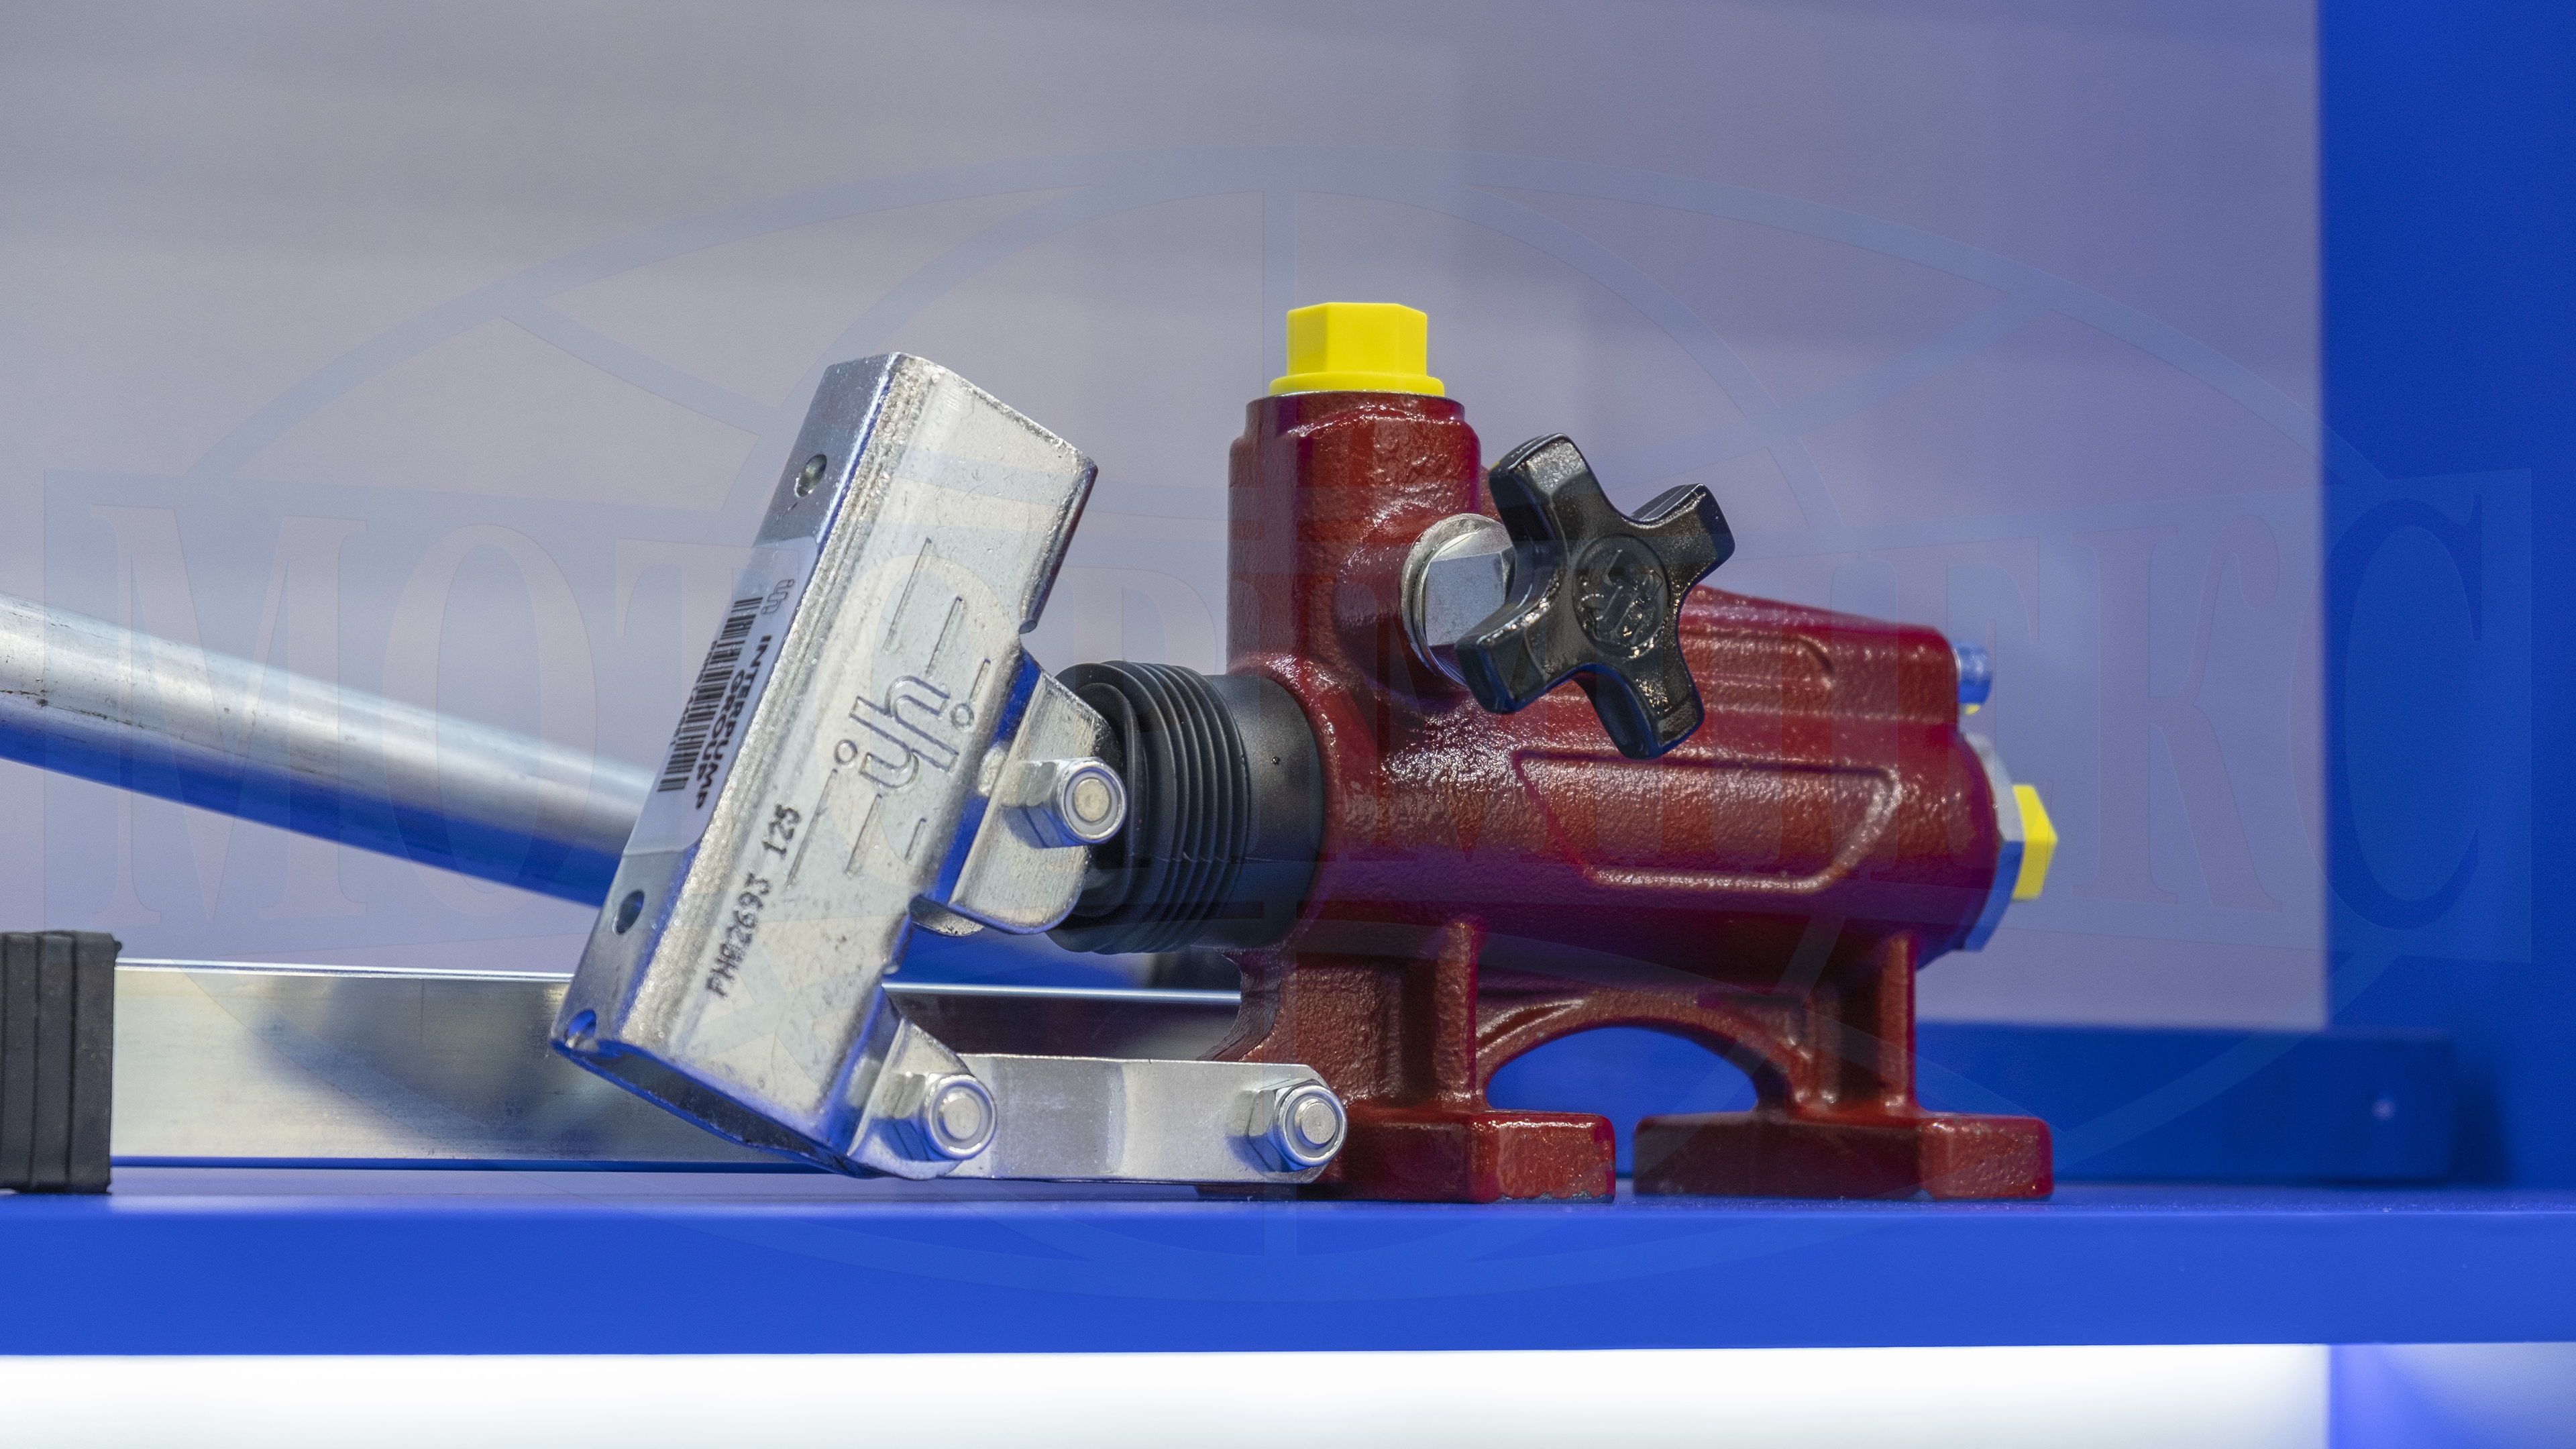 Manual hydraulic pump from the 'Motorimpex' Group of companies at the International Industrial Forum 2020